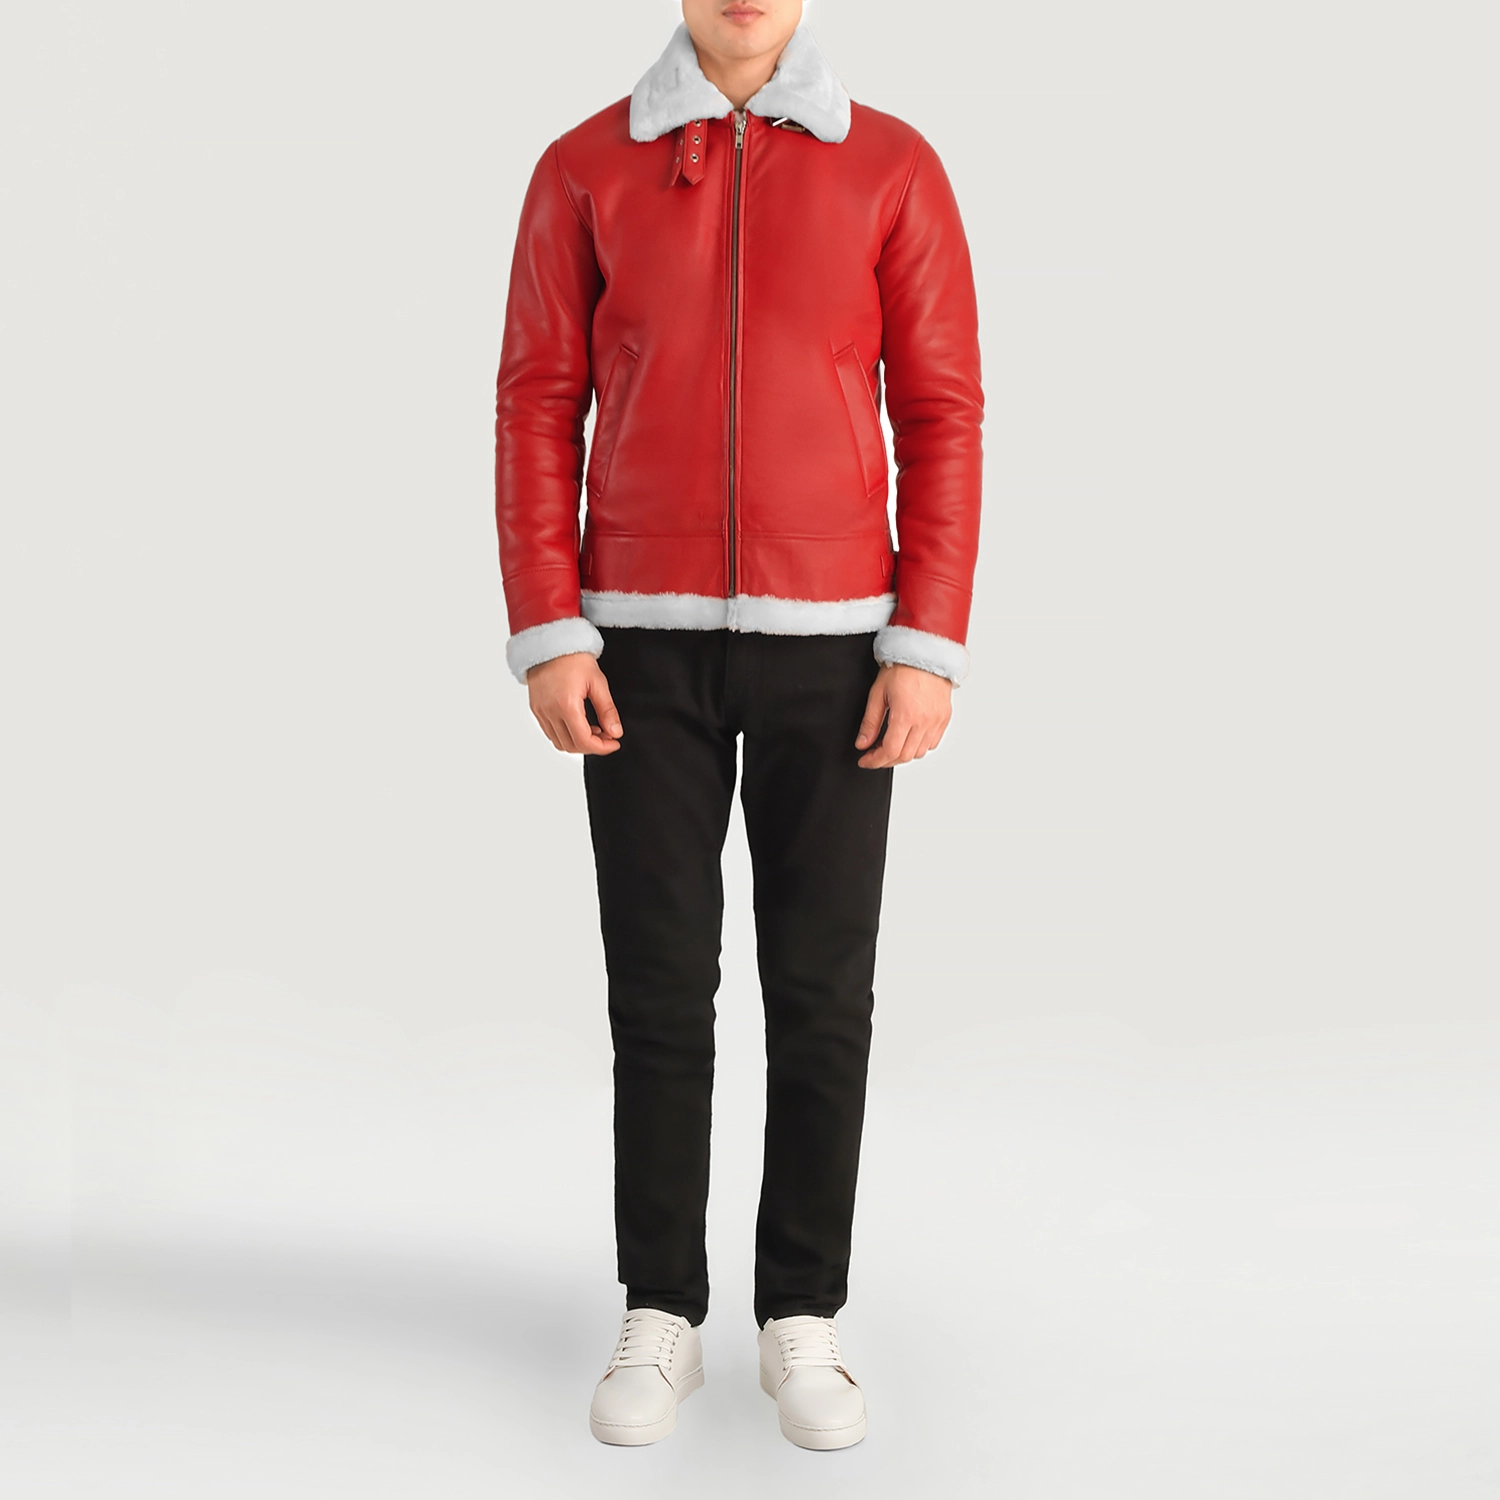 Francis B-3 Red Leather Bomber Jacket